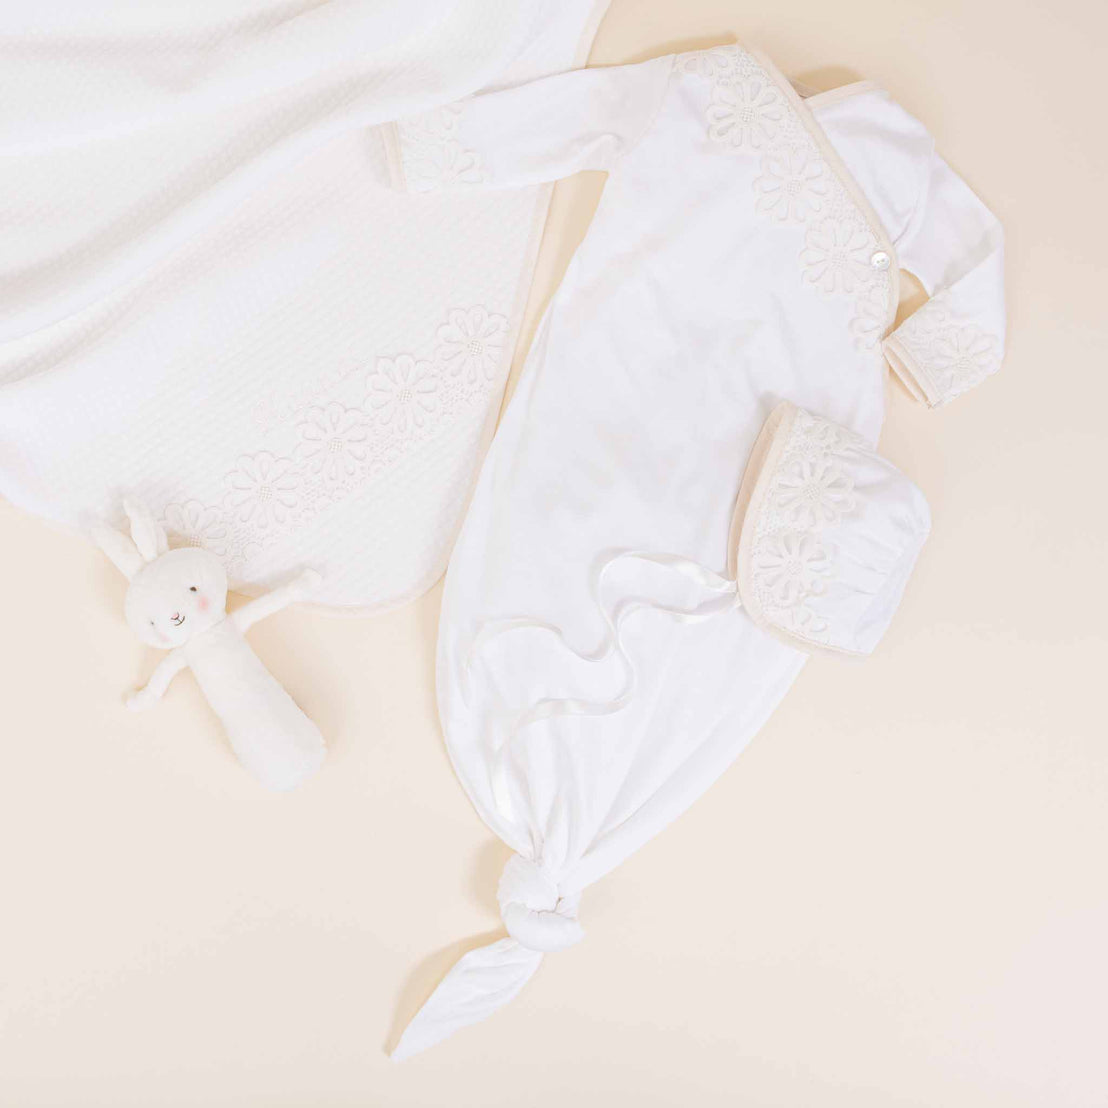 A flat lay of the Hannah Newborn Gift Set- Save 10%, featuring a white knitted gown with floral details, a matching hat, a cozy blanket, and a small white bunny plush toy, all arranged on.